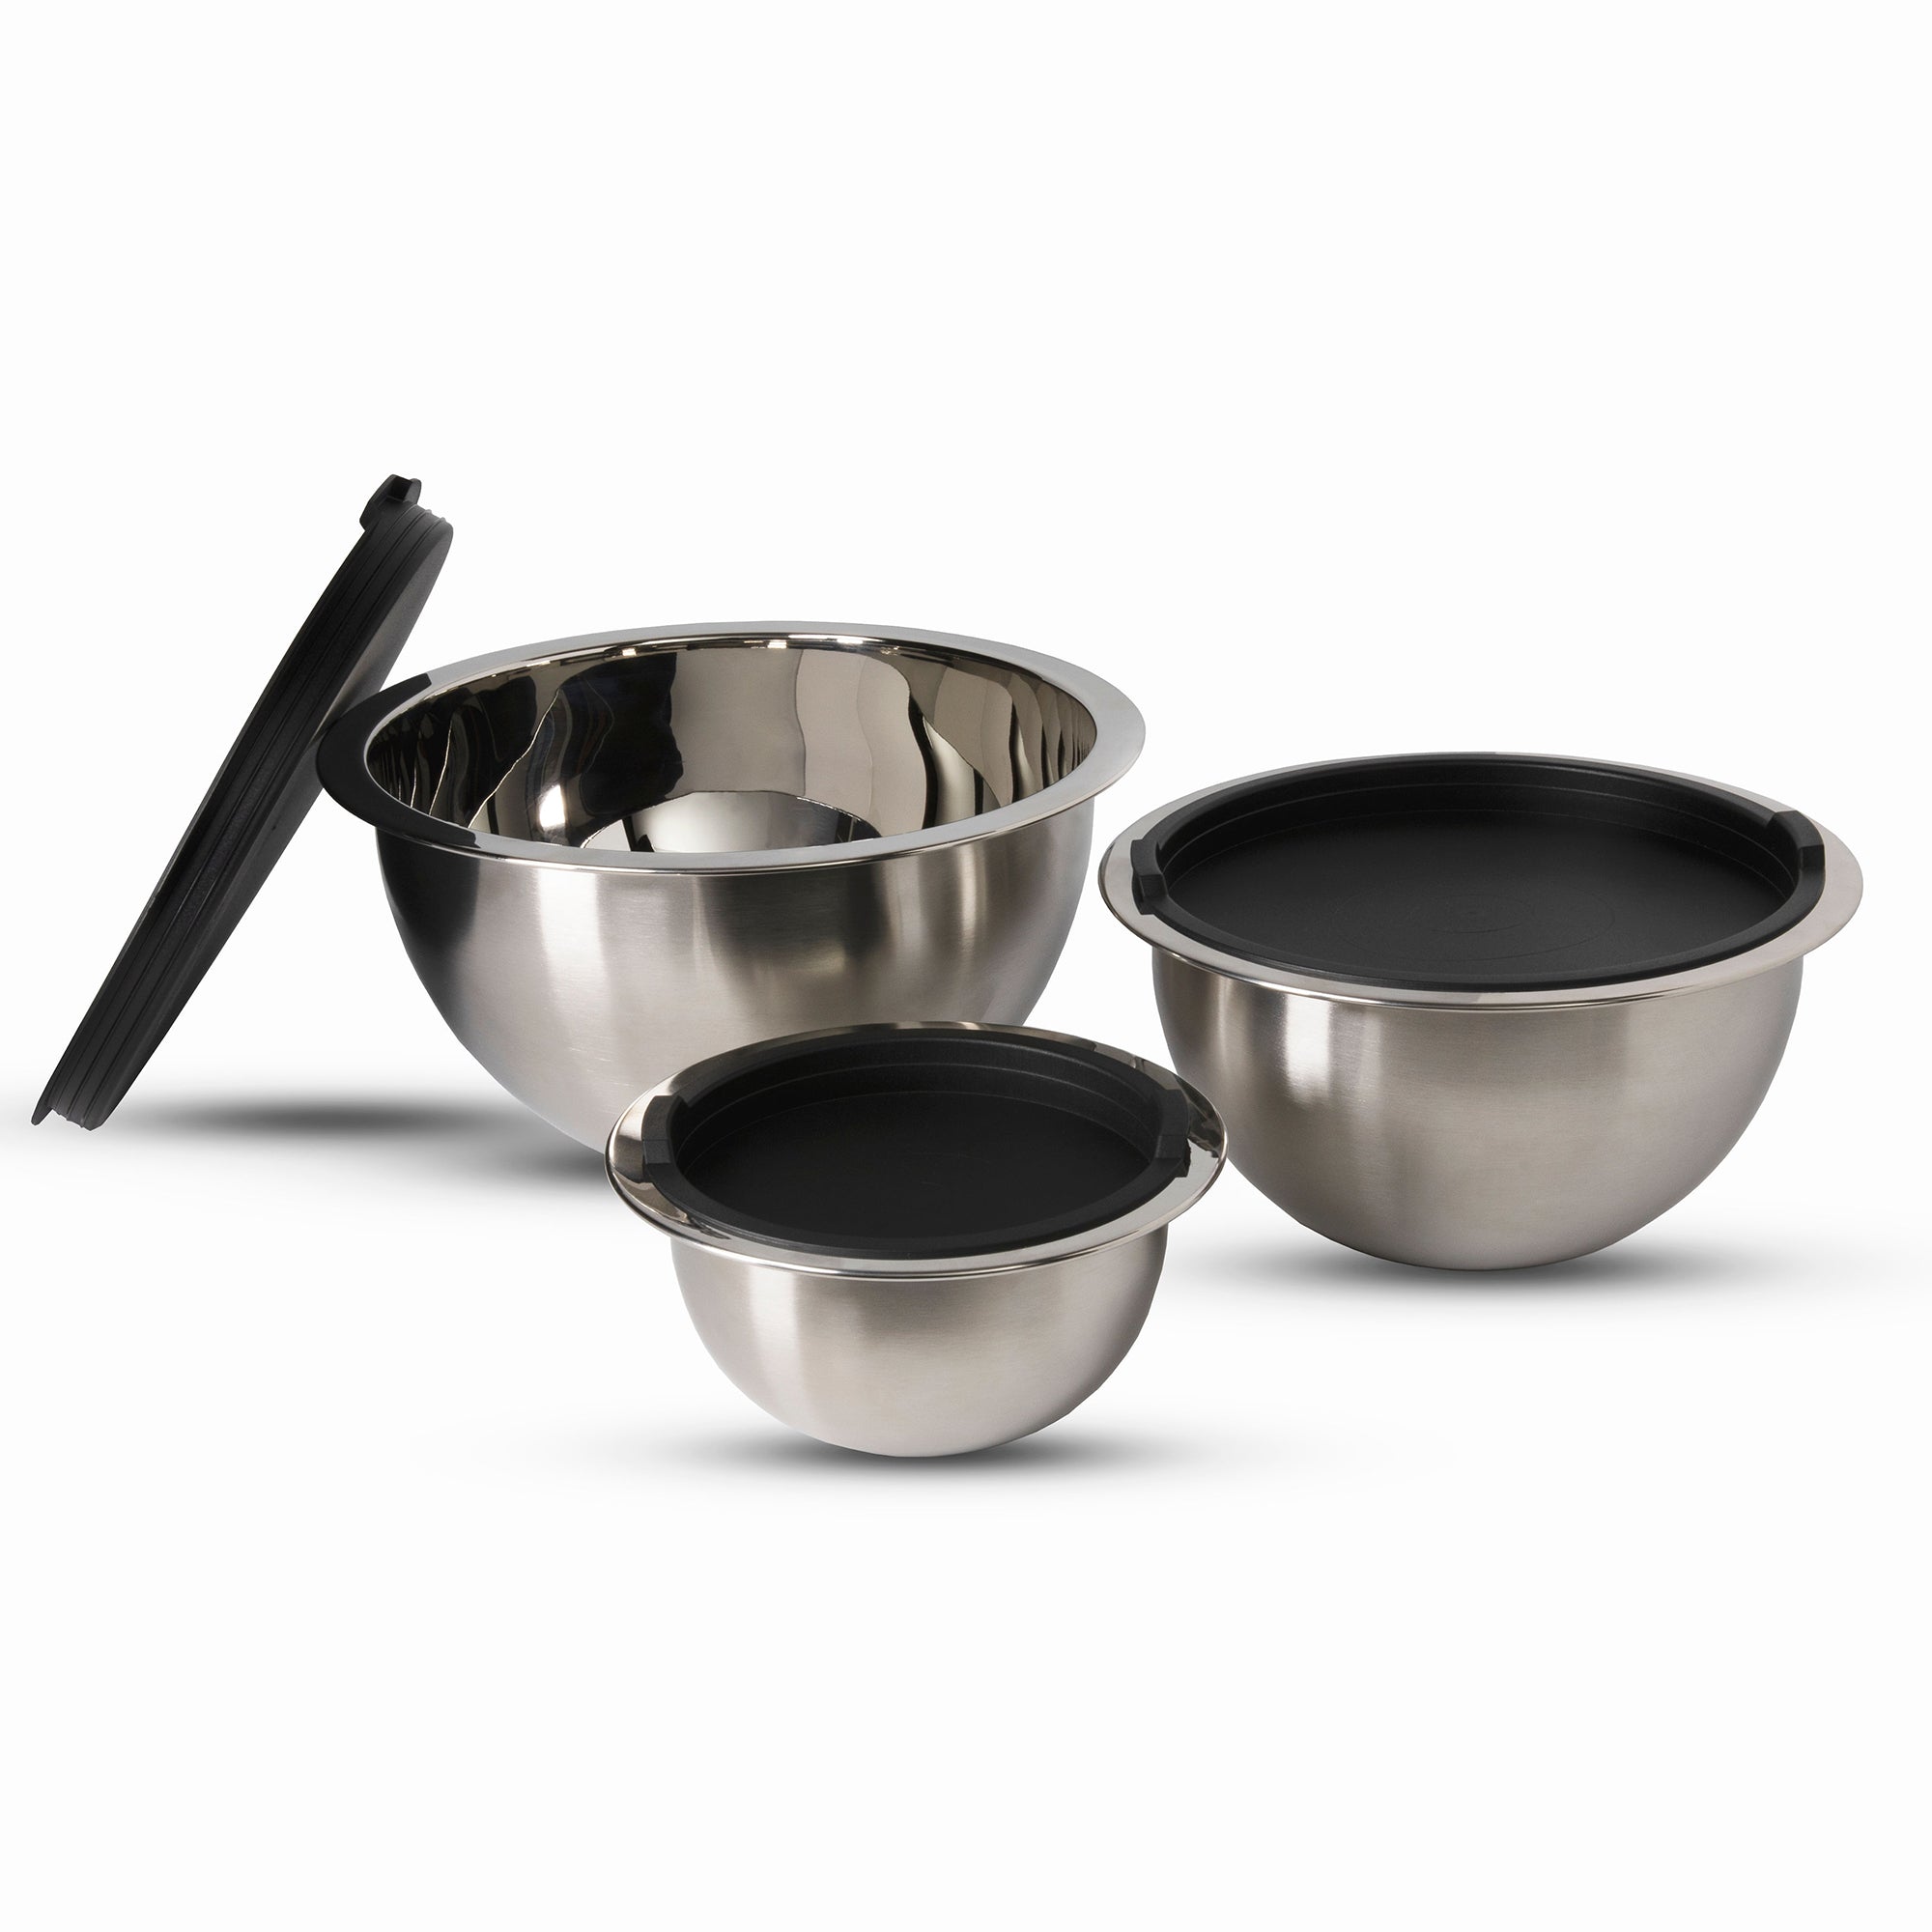 stainless steel mixing bowl set